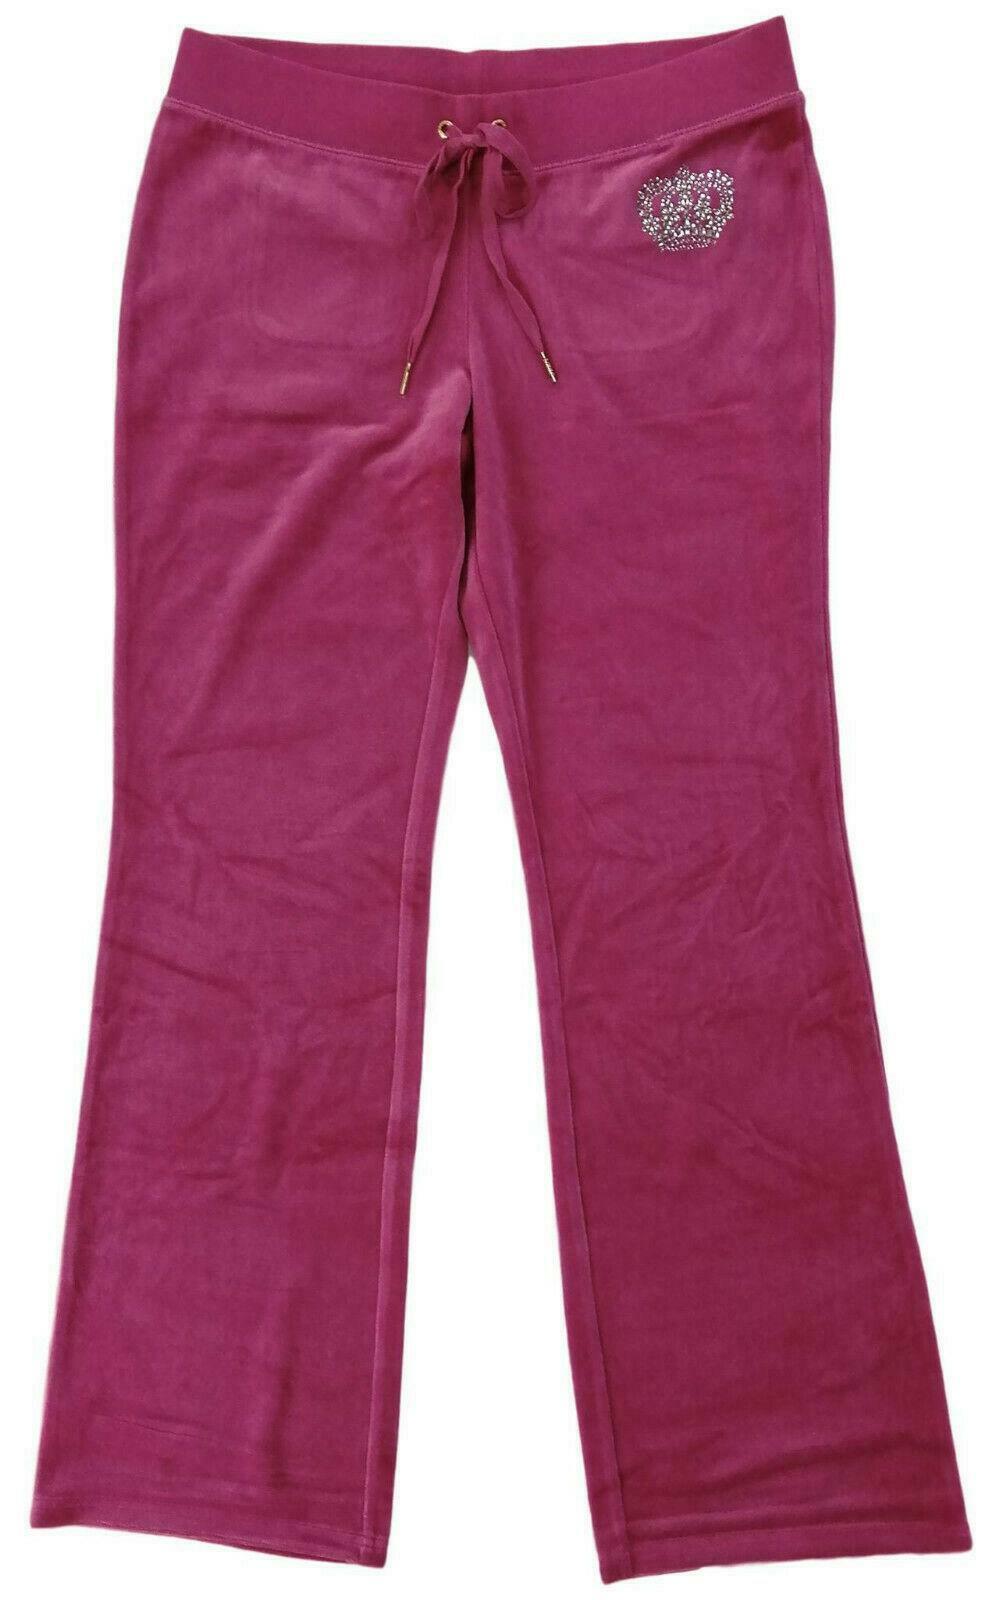 Juicy Couture Large Pink Bottoms Trousers Raspberry Del Rey Crown Logo  Velour 